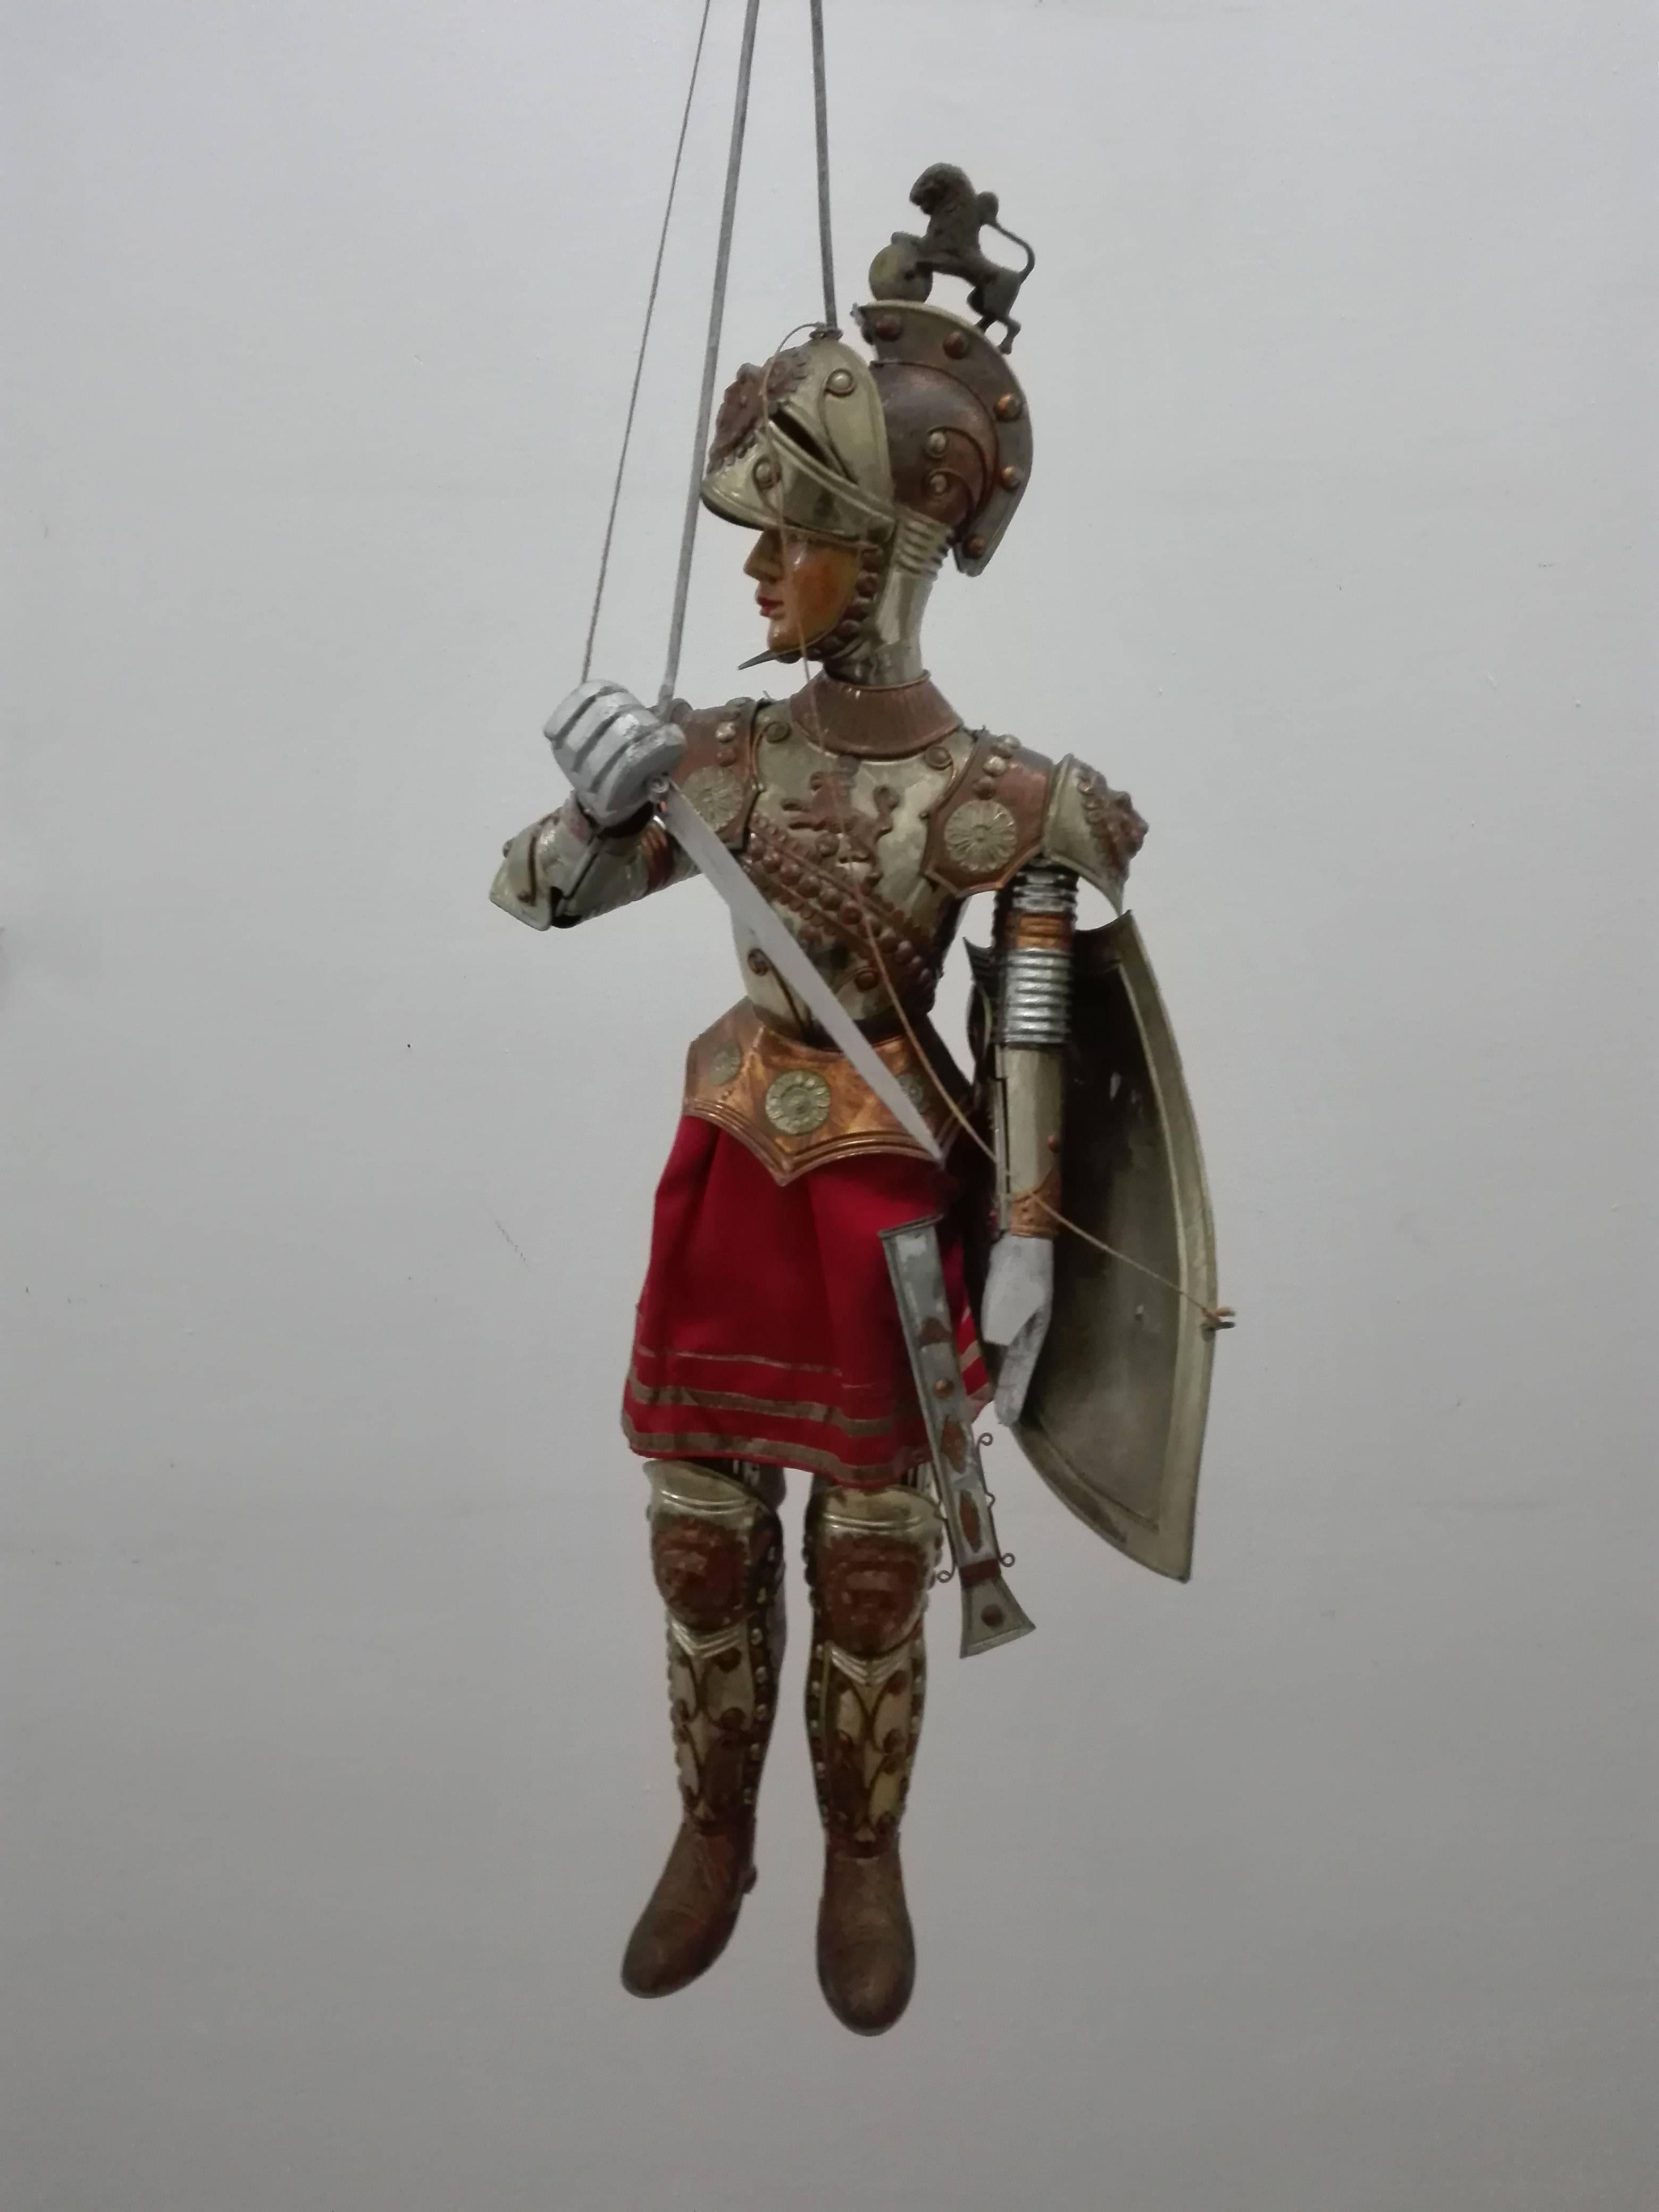 Sicilian Pupo-marionette-pupi-paladin:
Palermitan school pupil, in richly arabesque alpacca with copper inserts, packaged for dismantling, 95 cm high, painted with oil paints, built by trade.